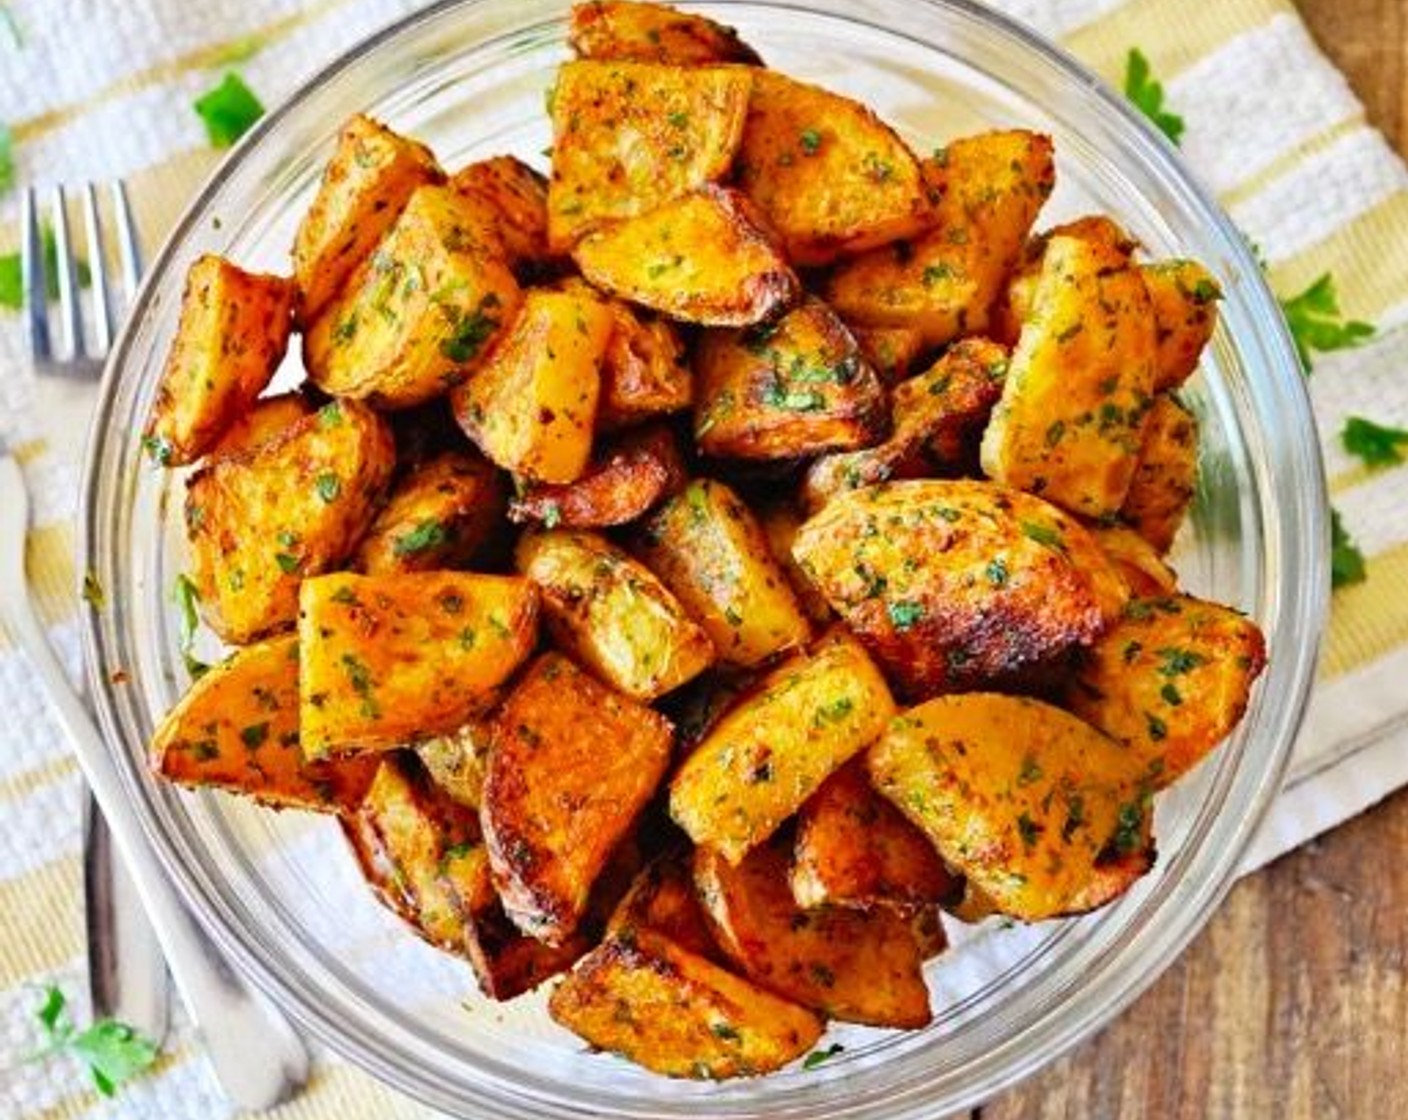 Roasted Spanish Potatoes with Paprika and Parsley